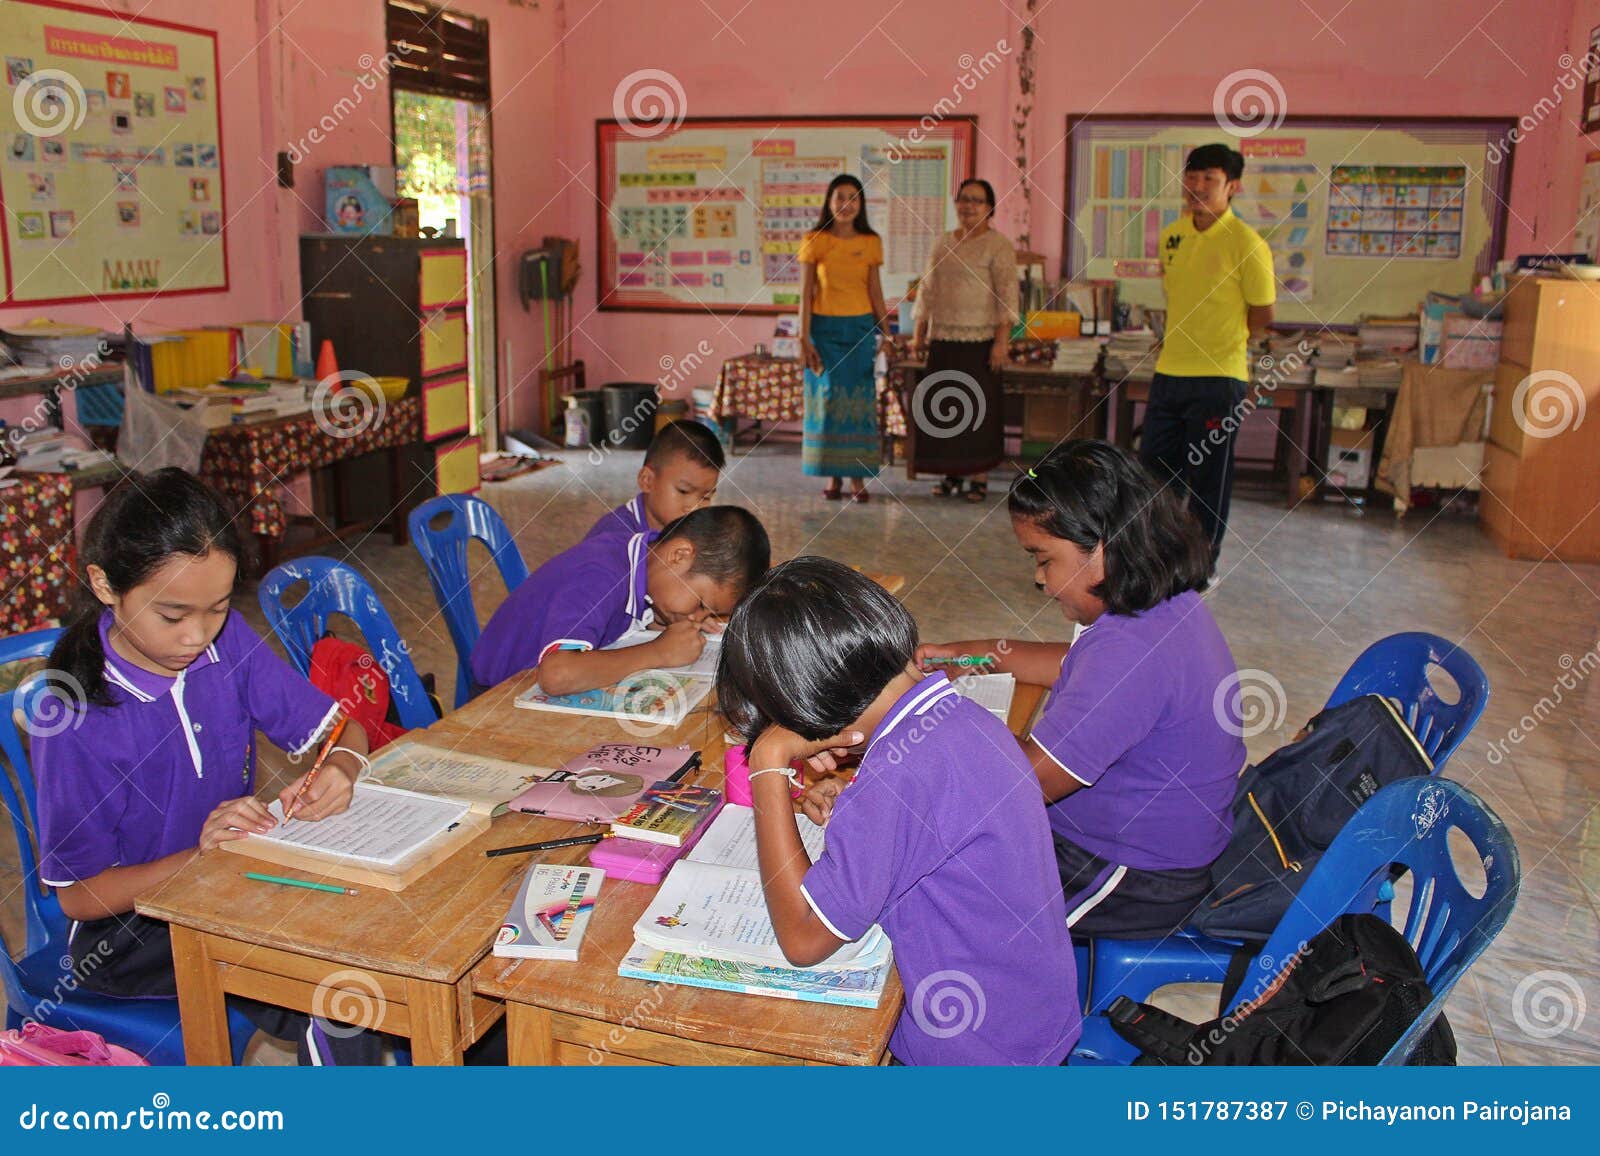 They Are Studying In Their Classroom Editorial Photography Image Of Asia Desk 151787387